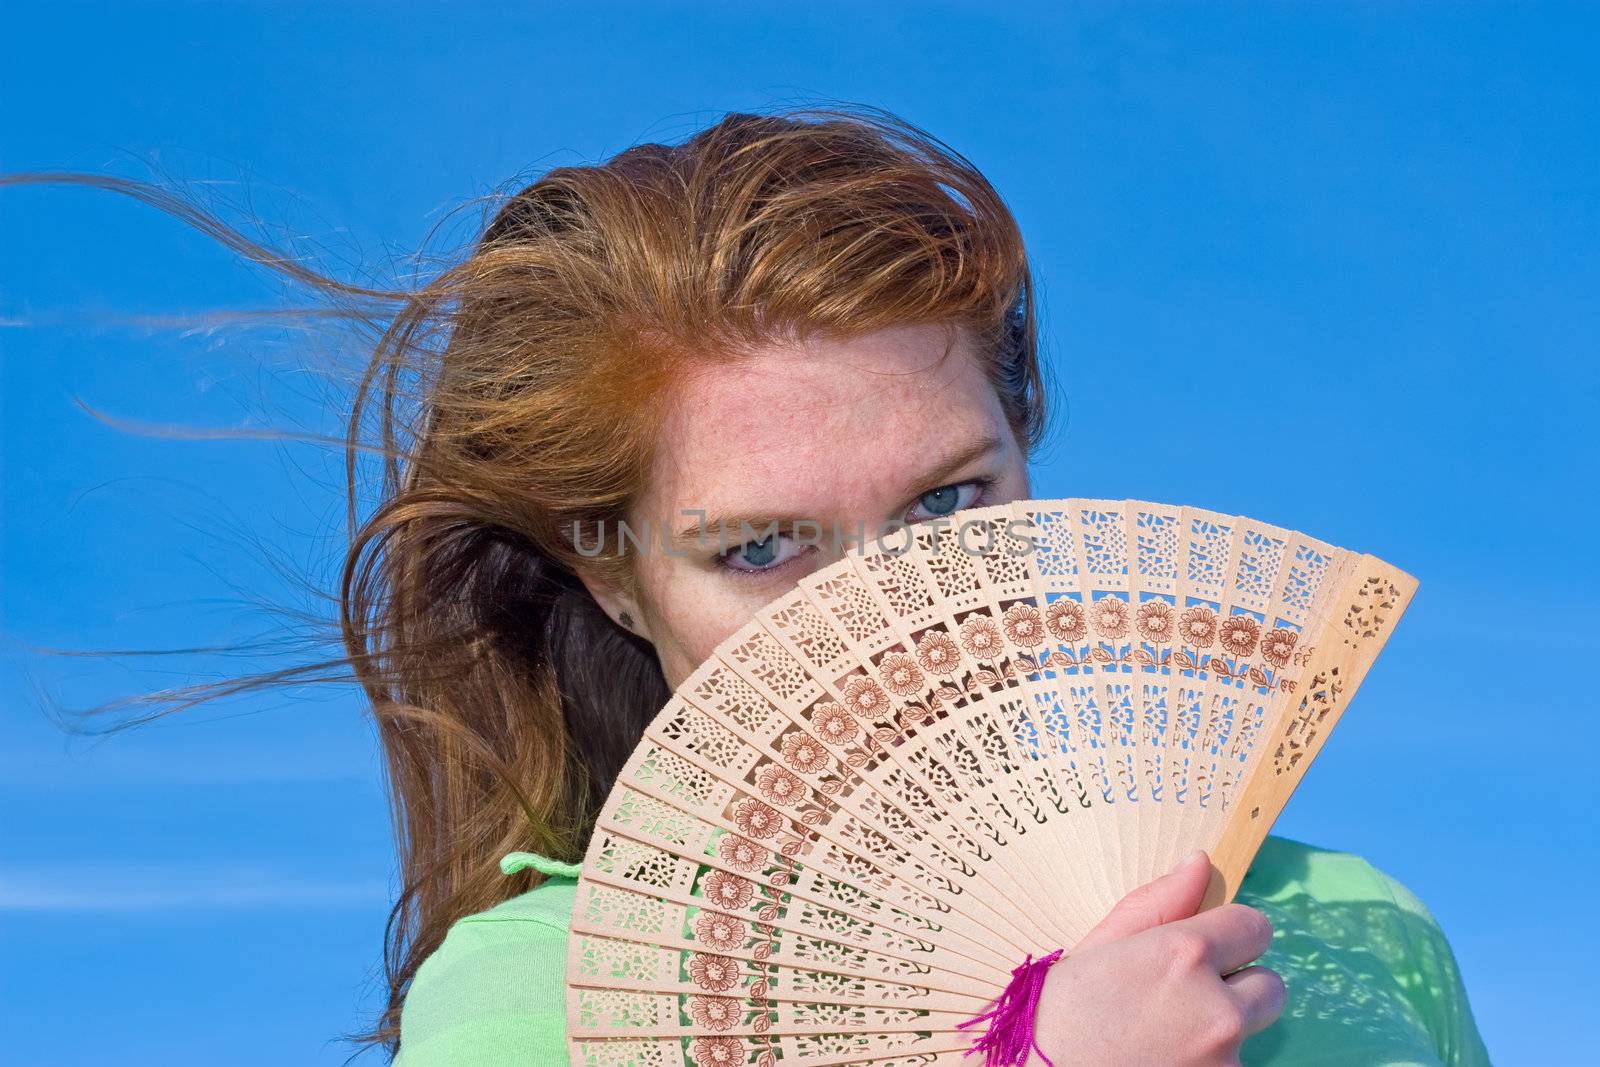 Attractive red head using an Asian fan